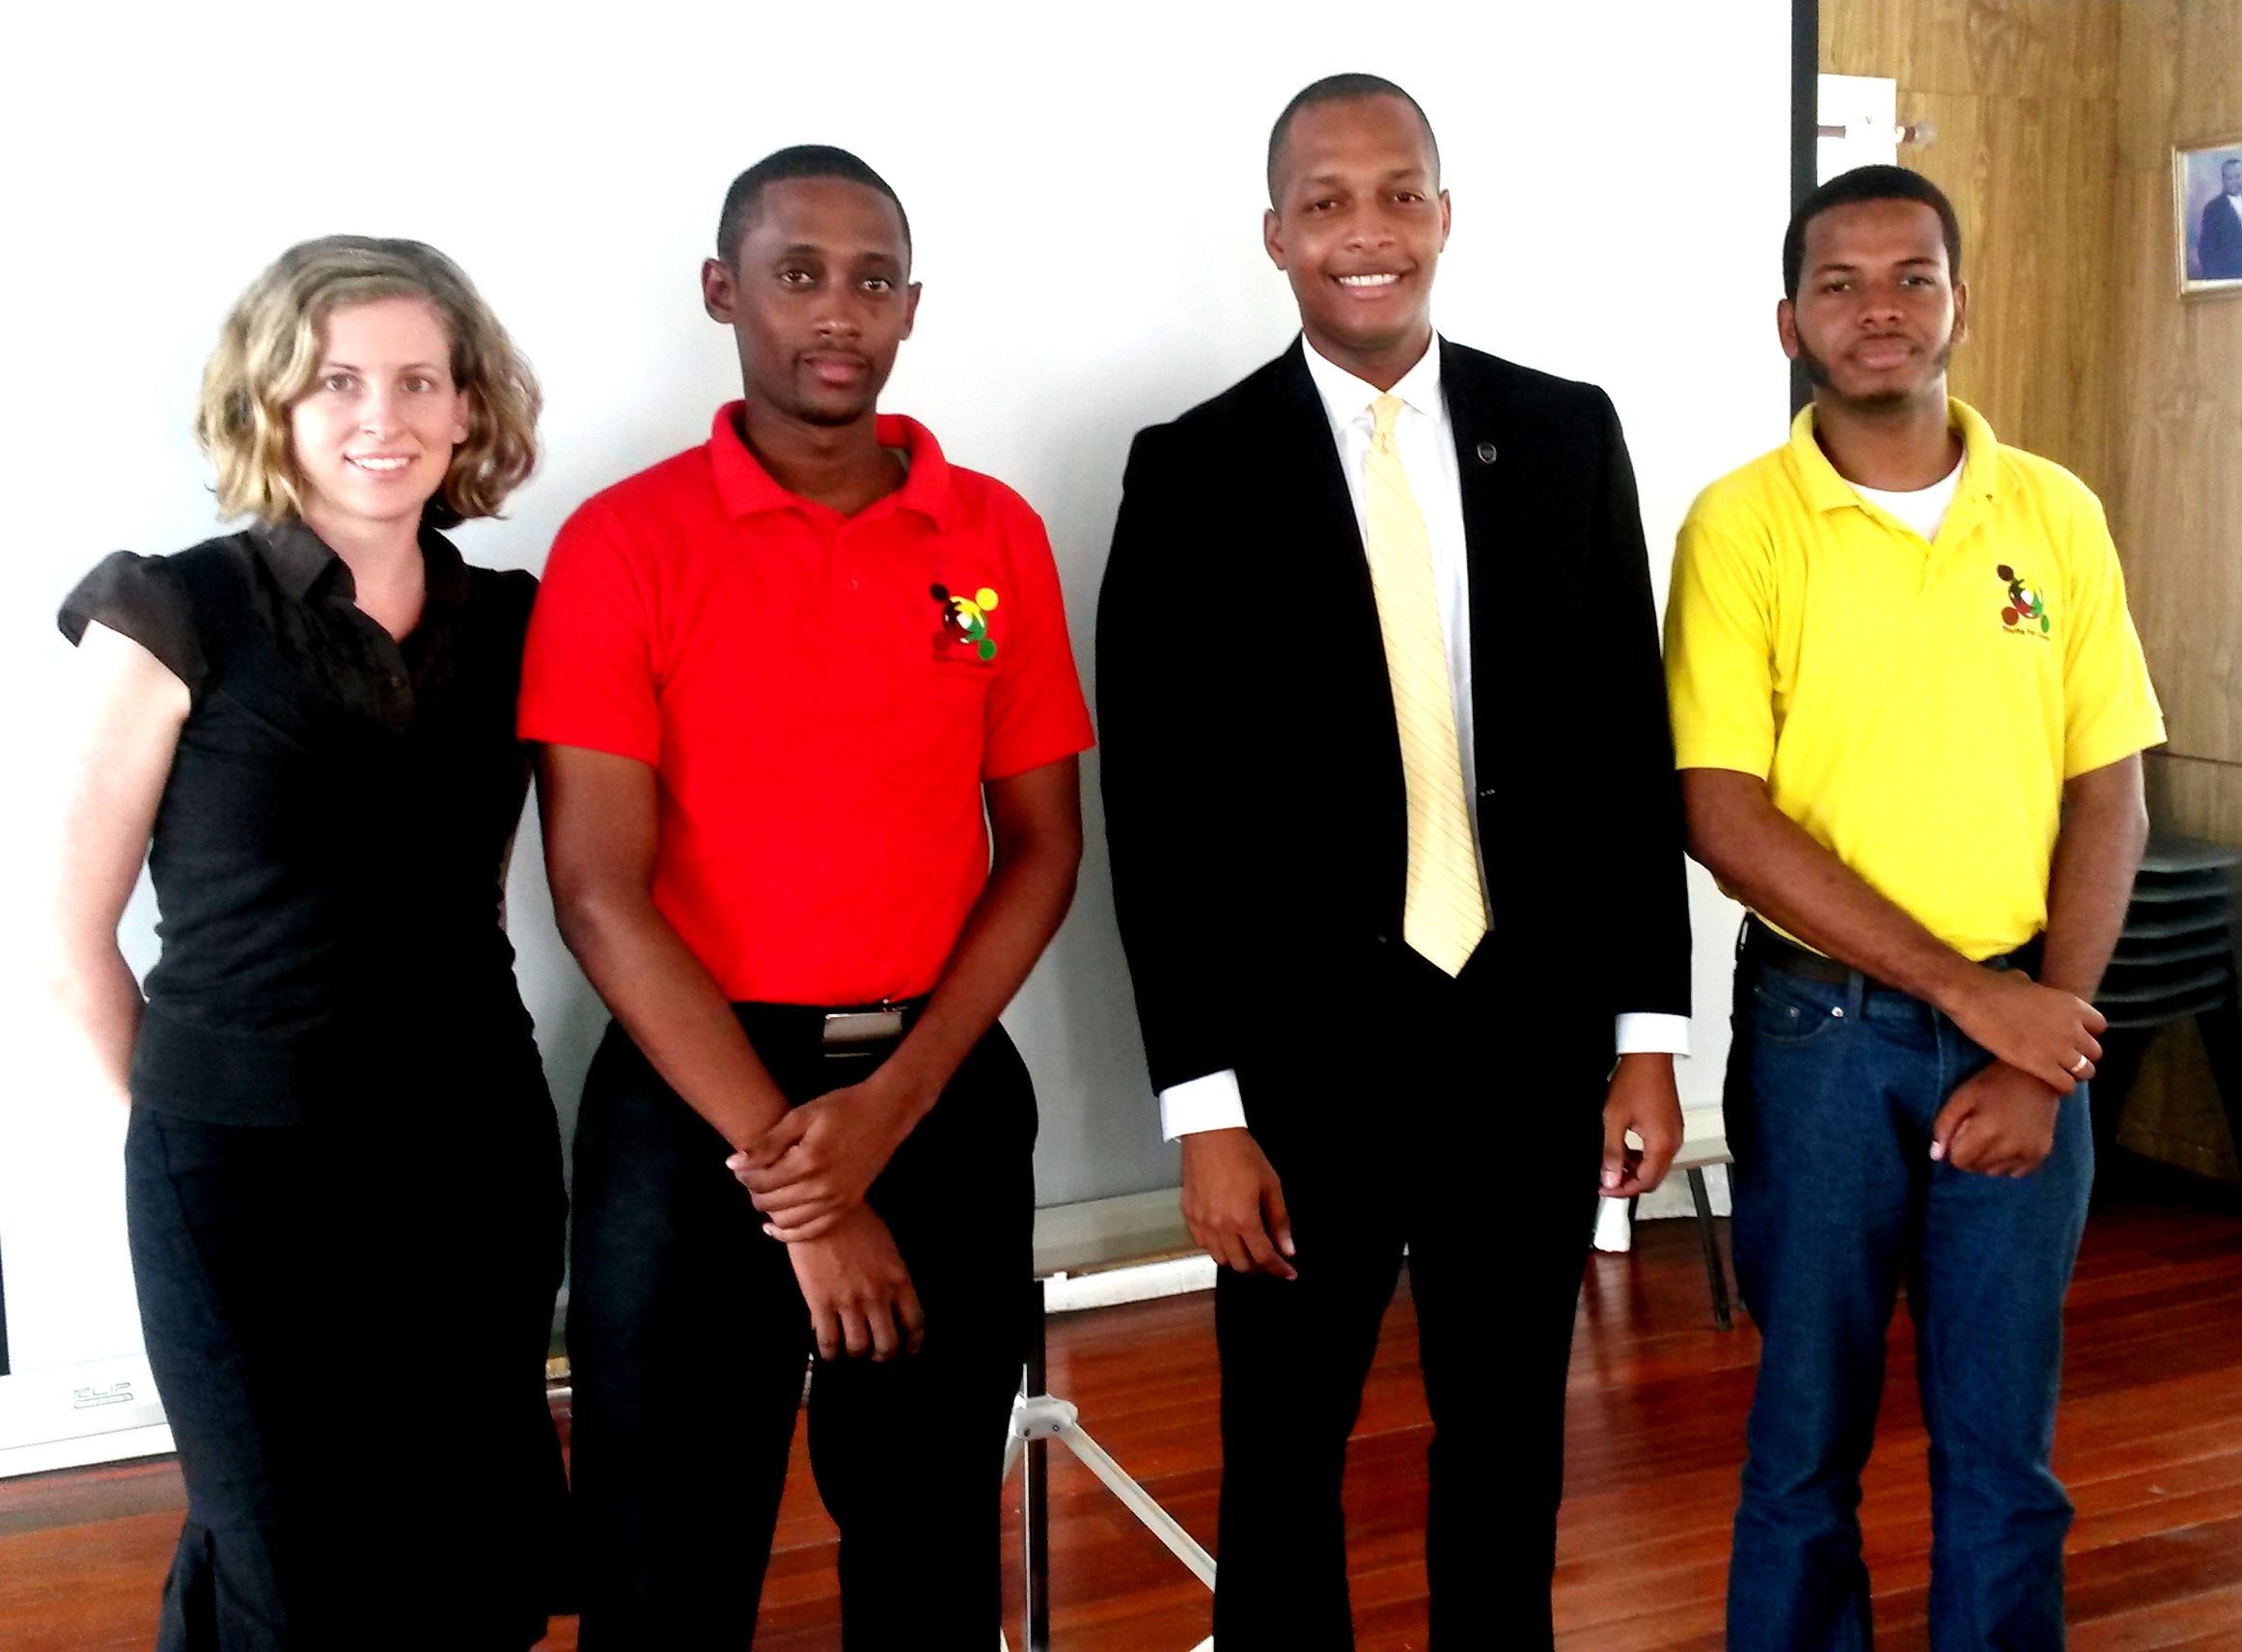 President of the GCCI, Mr. Clinton Urling meets with members of Guyana Shines at the Office of the Chamber today, March 19, 2014.